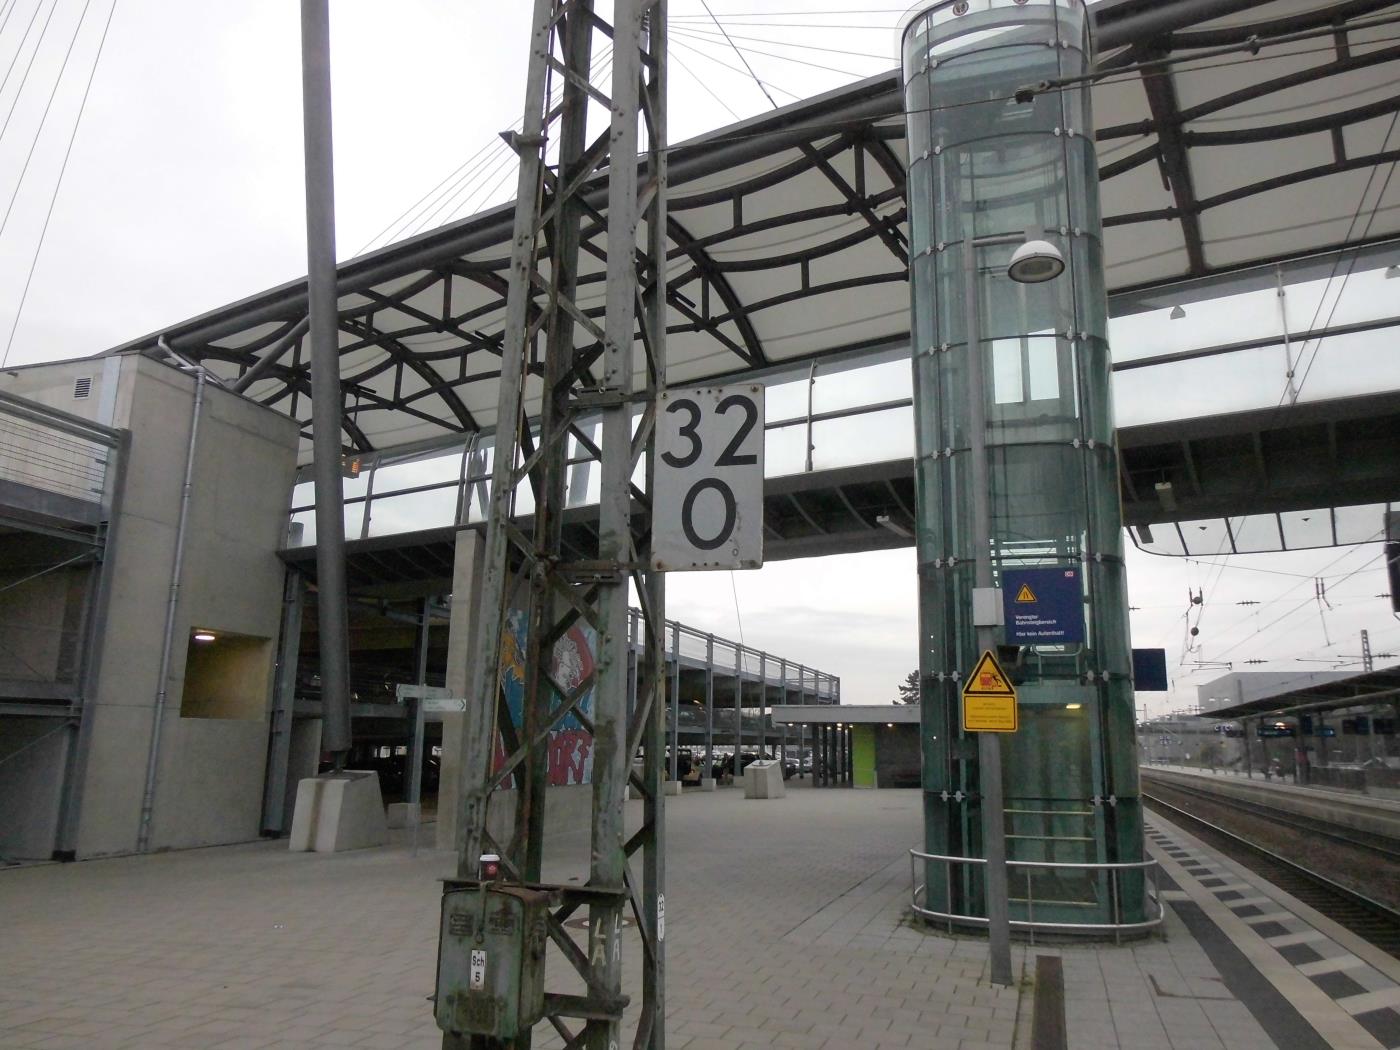 Jehovah's Witnesses like to stand at Walldorf-Wiesloch station